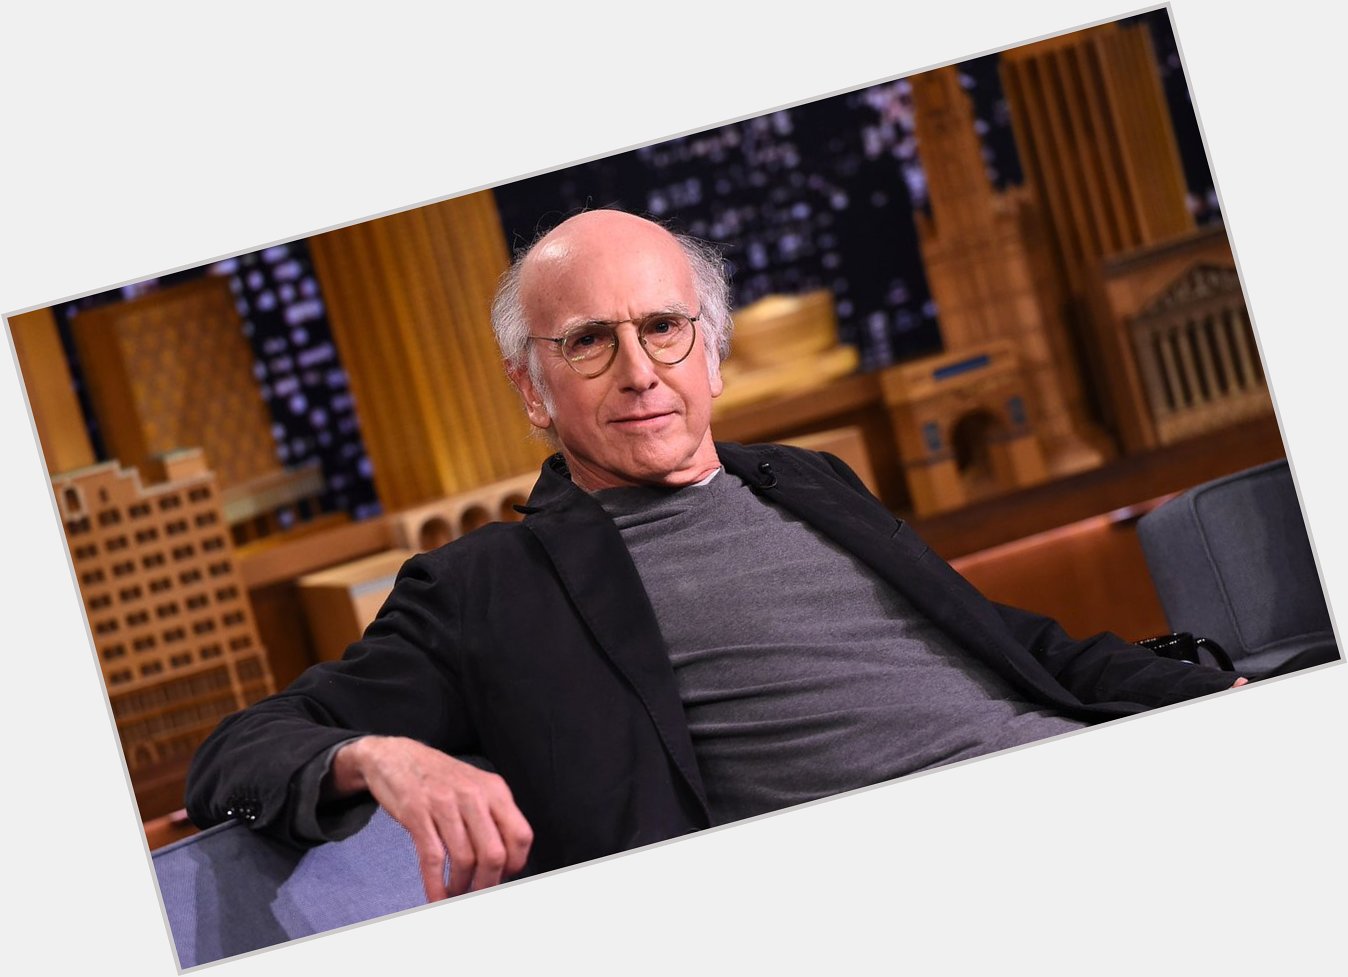 Happy bday to Larry David, Creator of Curb your Enthusiasm 